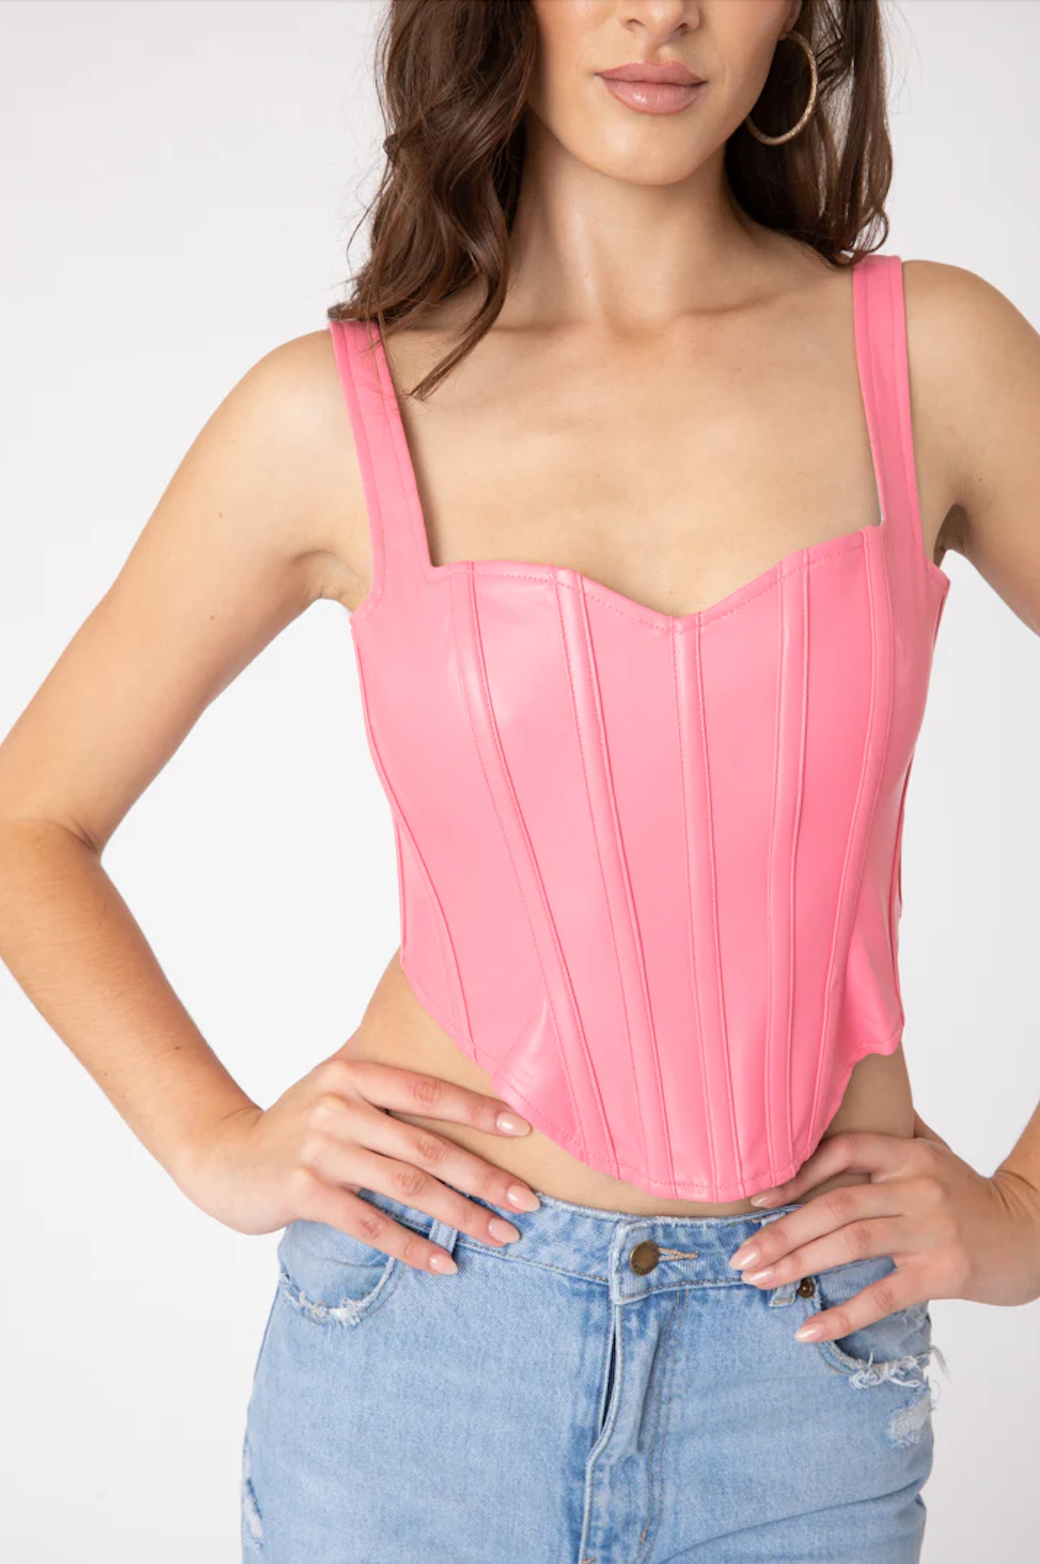 Gathered Bustier-style Top - Pink - Ladies